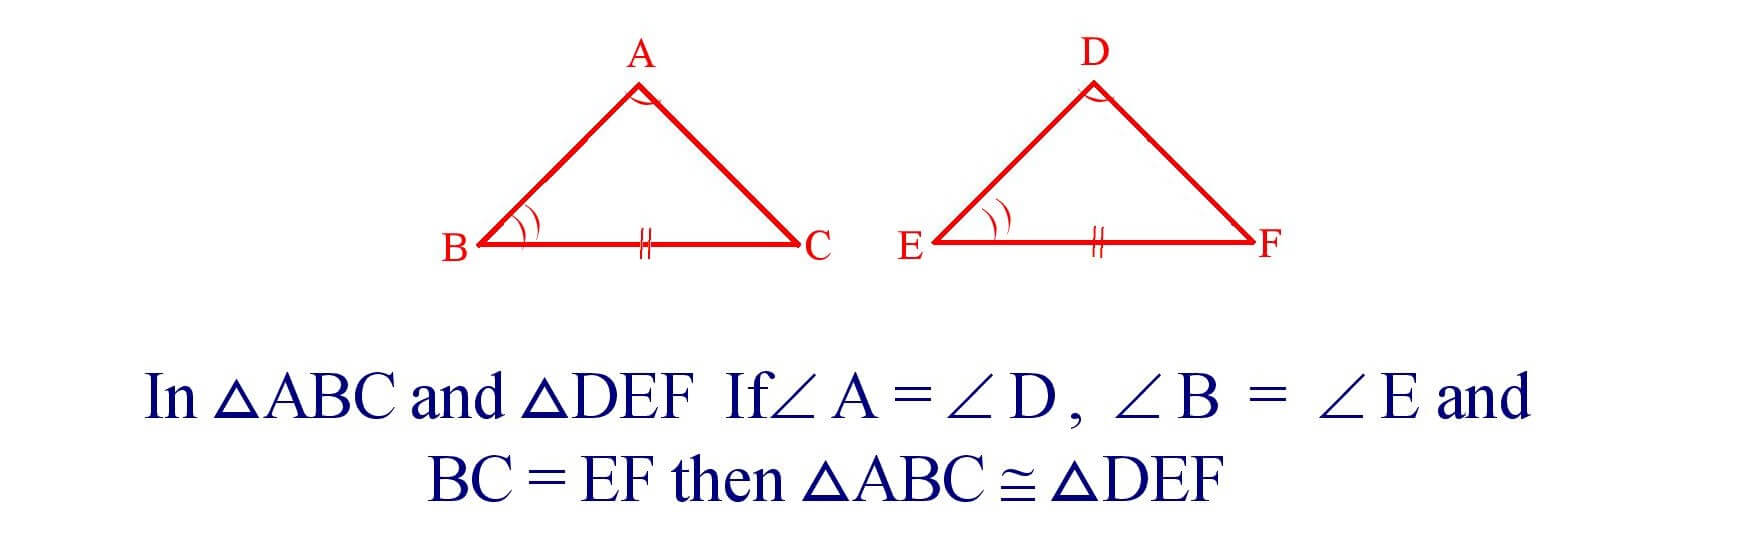 A - A - S Congruence of Triangles